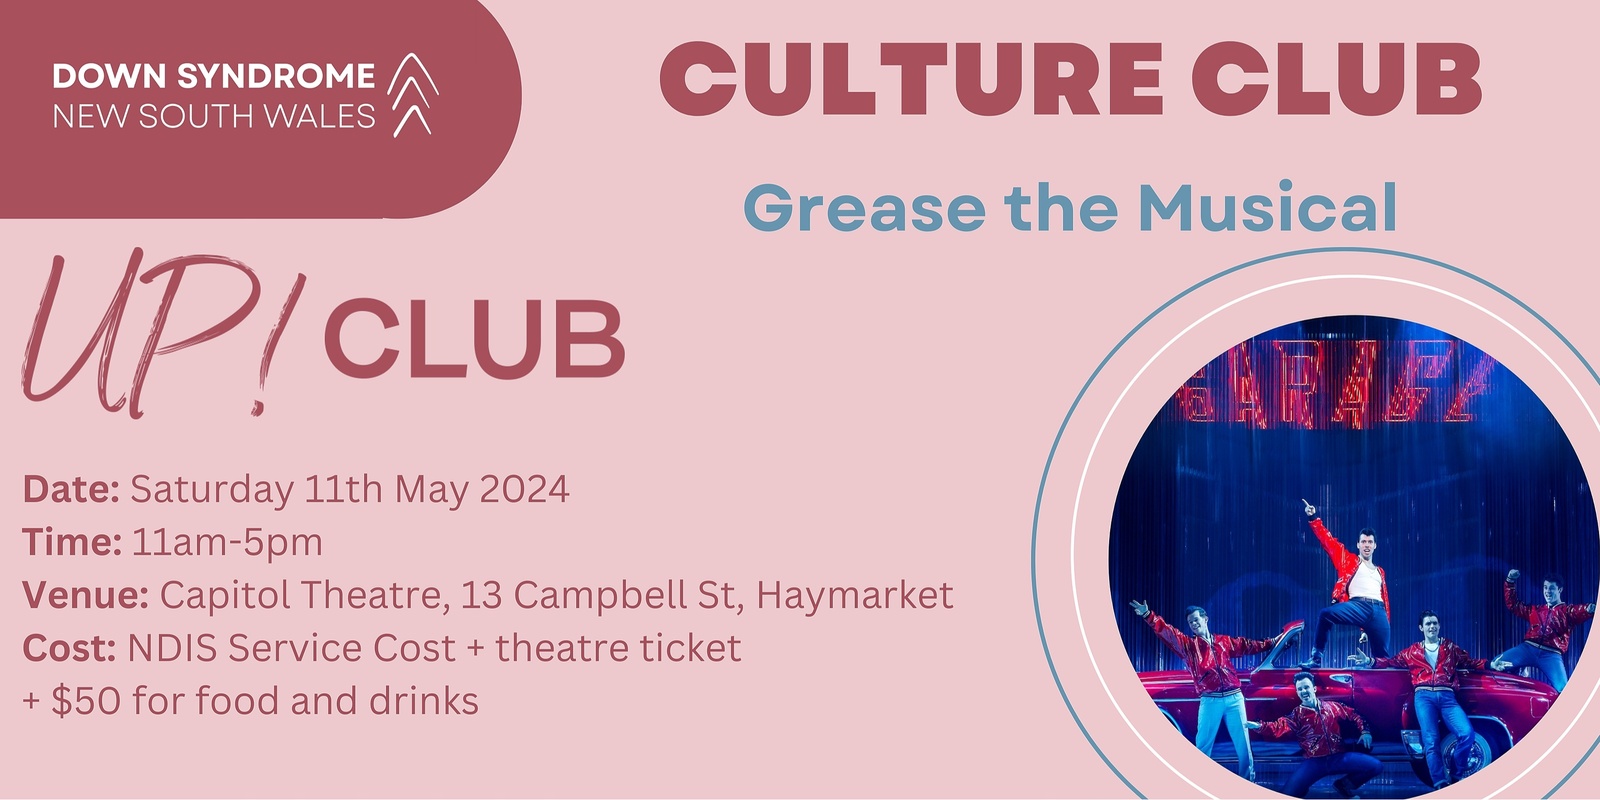 Banner image for UP! Club Culture Club: Grease the Musical